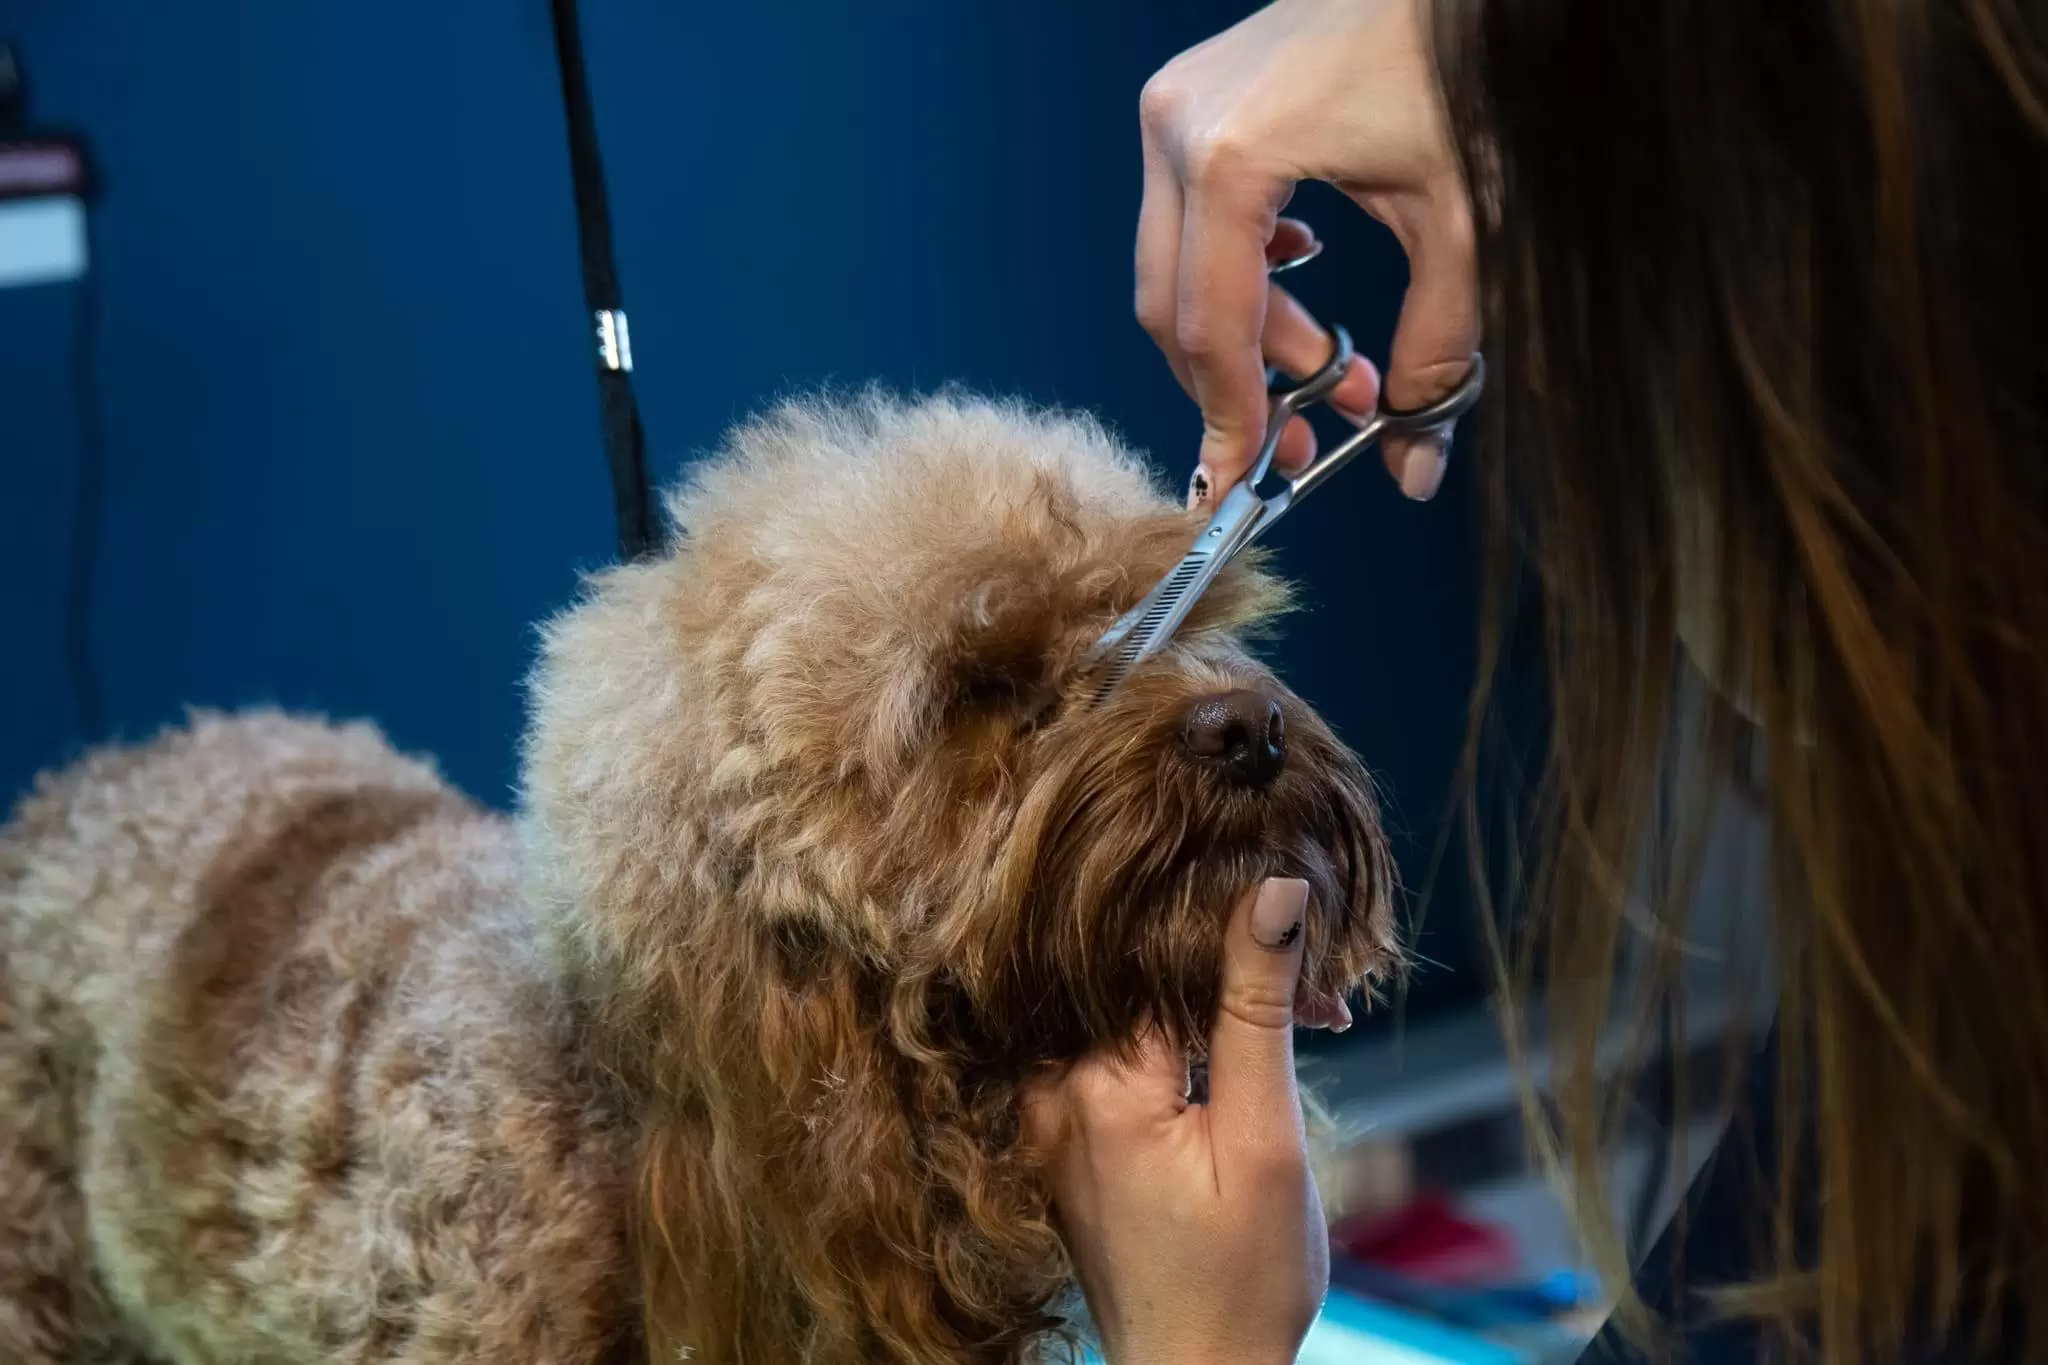 Sammys Trimming Fur Infront of Dogs eyes with Scissors